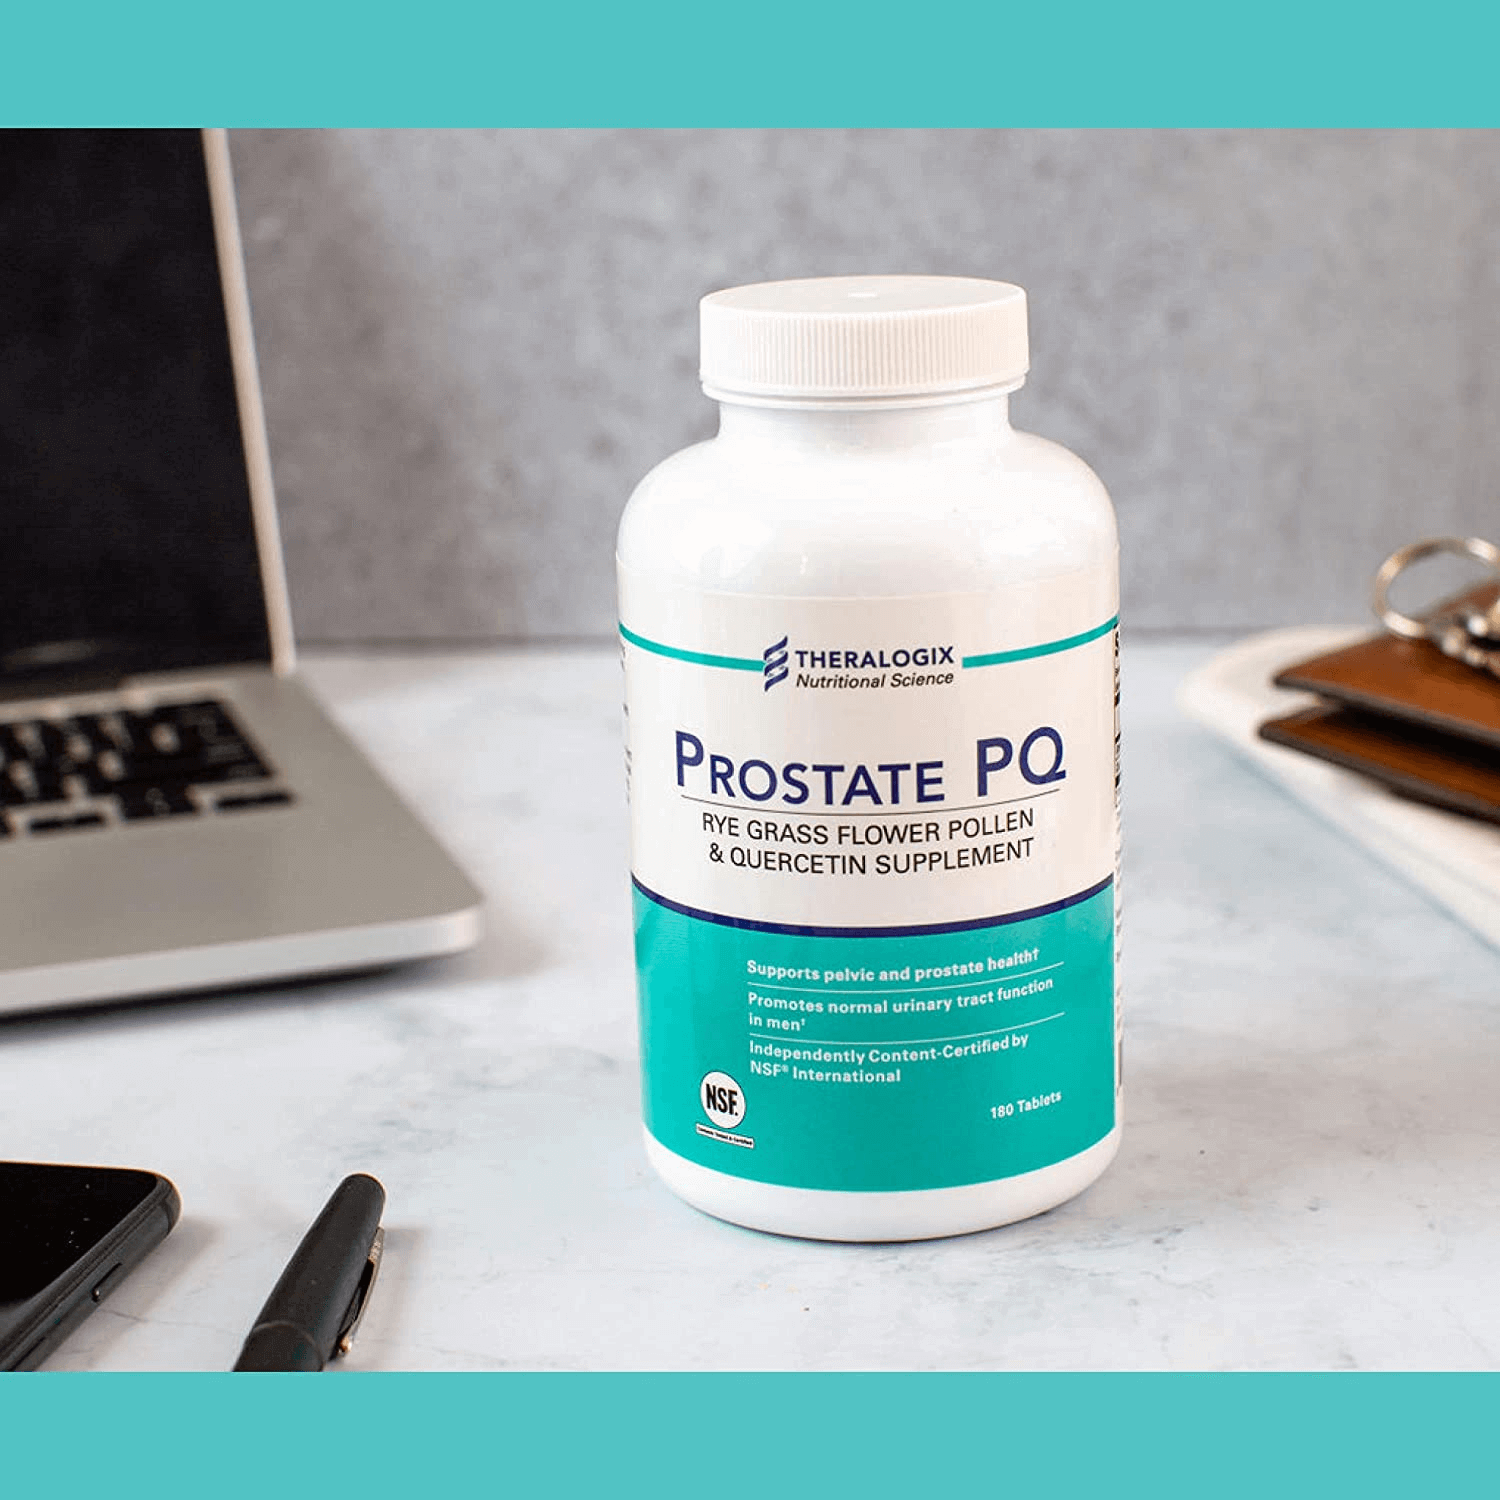 Prostate PQ Rye Grass Pollen Extract Supplement with Quercetin | 90 Day Supply - Allergen-Free | Made in the USA - vitamenstore.com